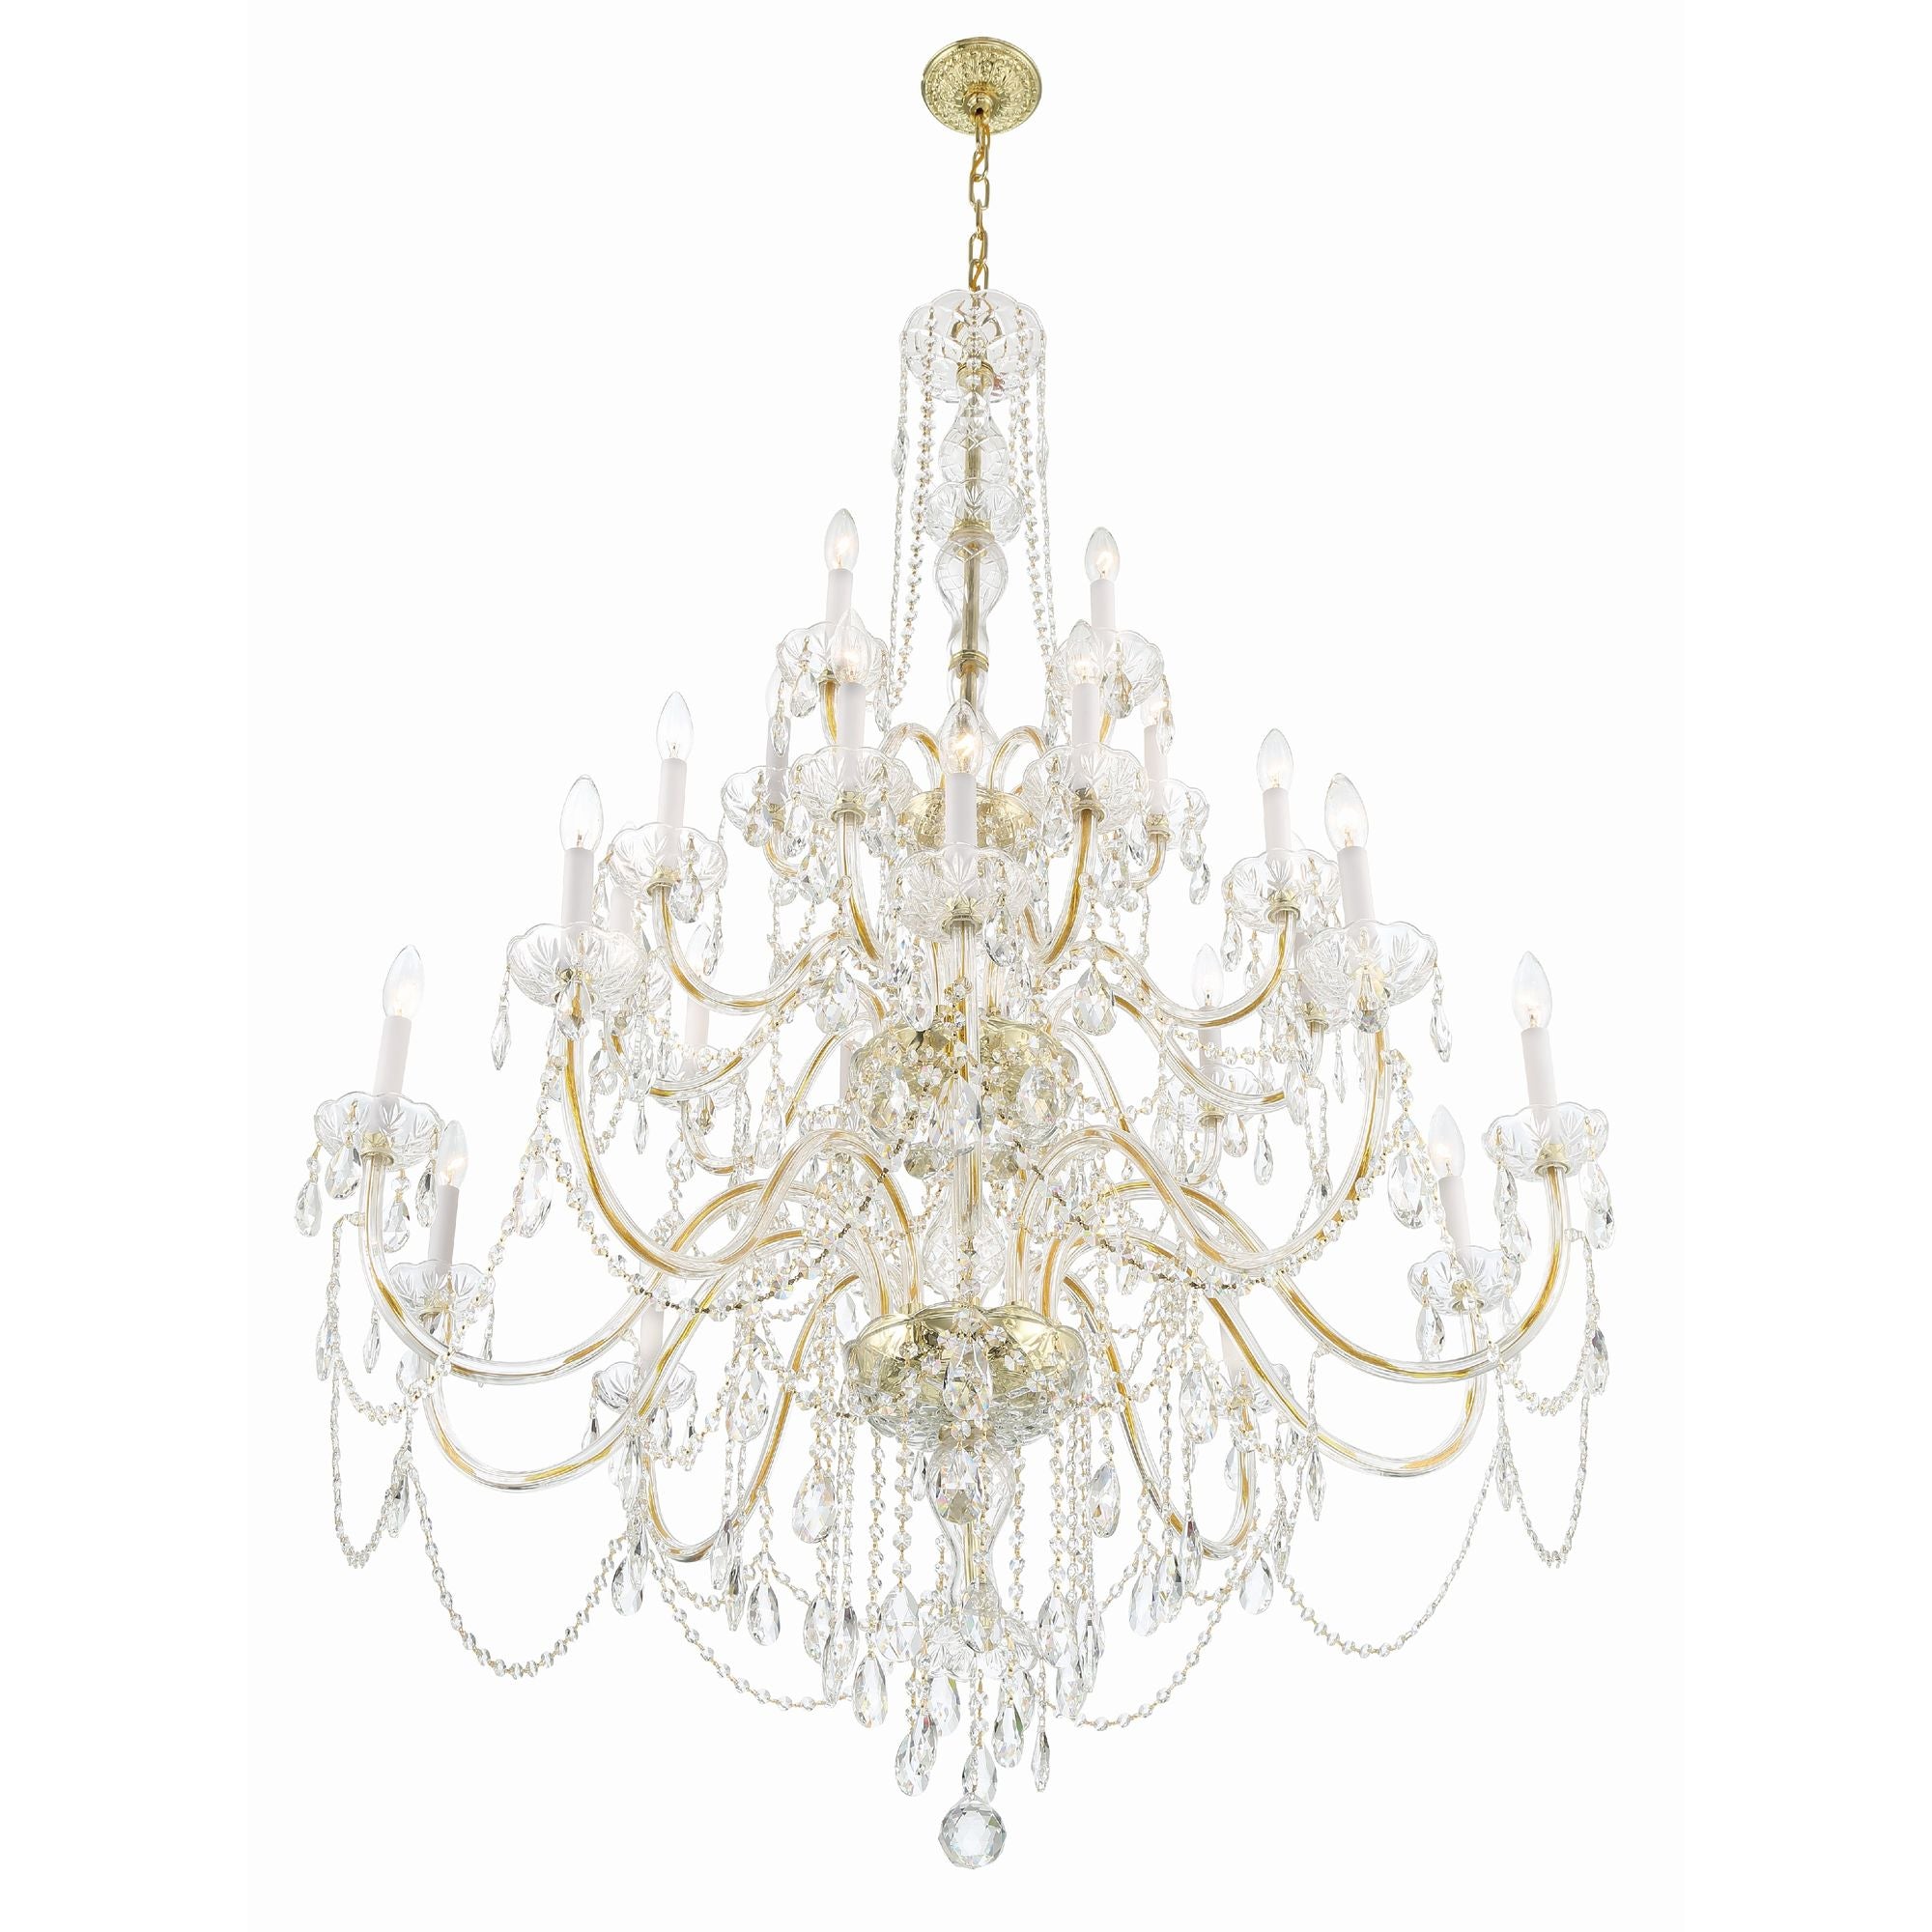 Traditional Crystal 25 Light Polished Brass Chandelier